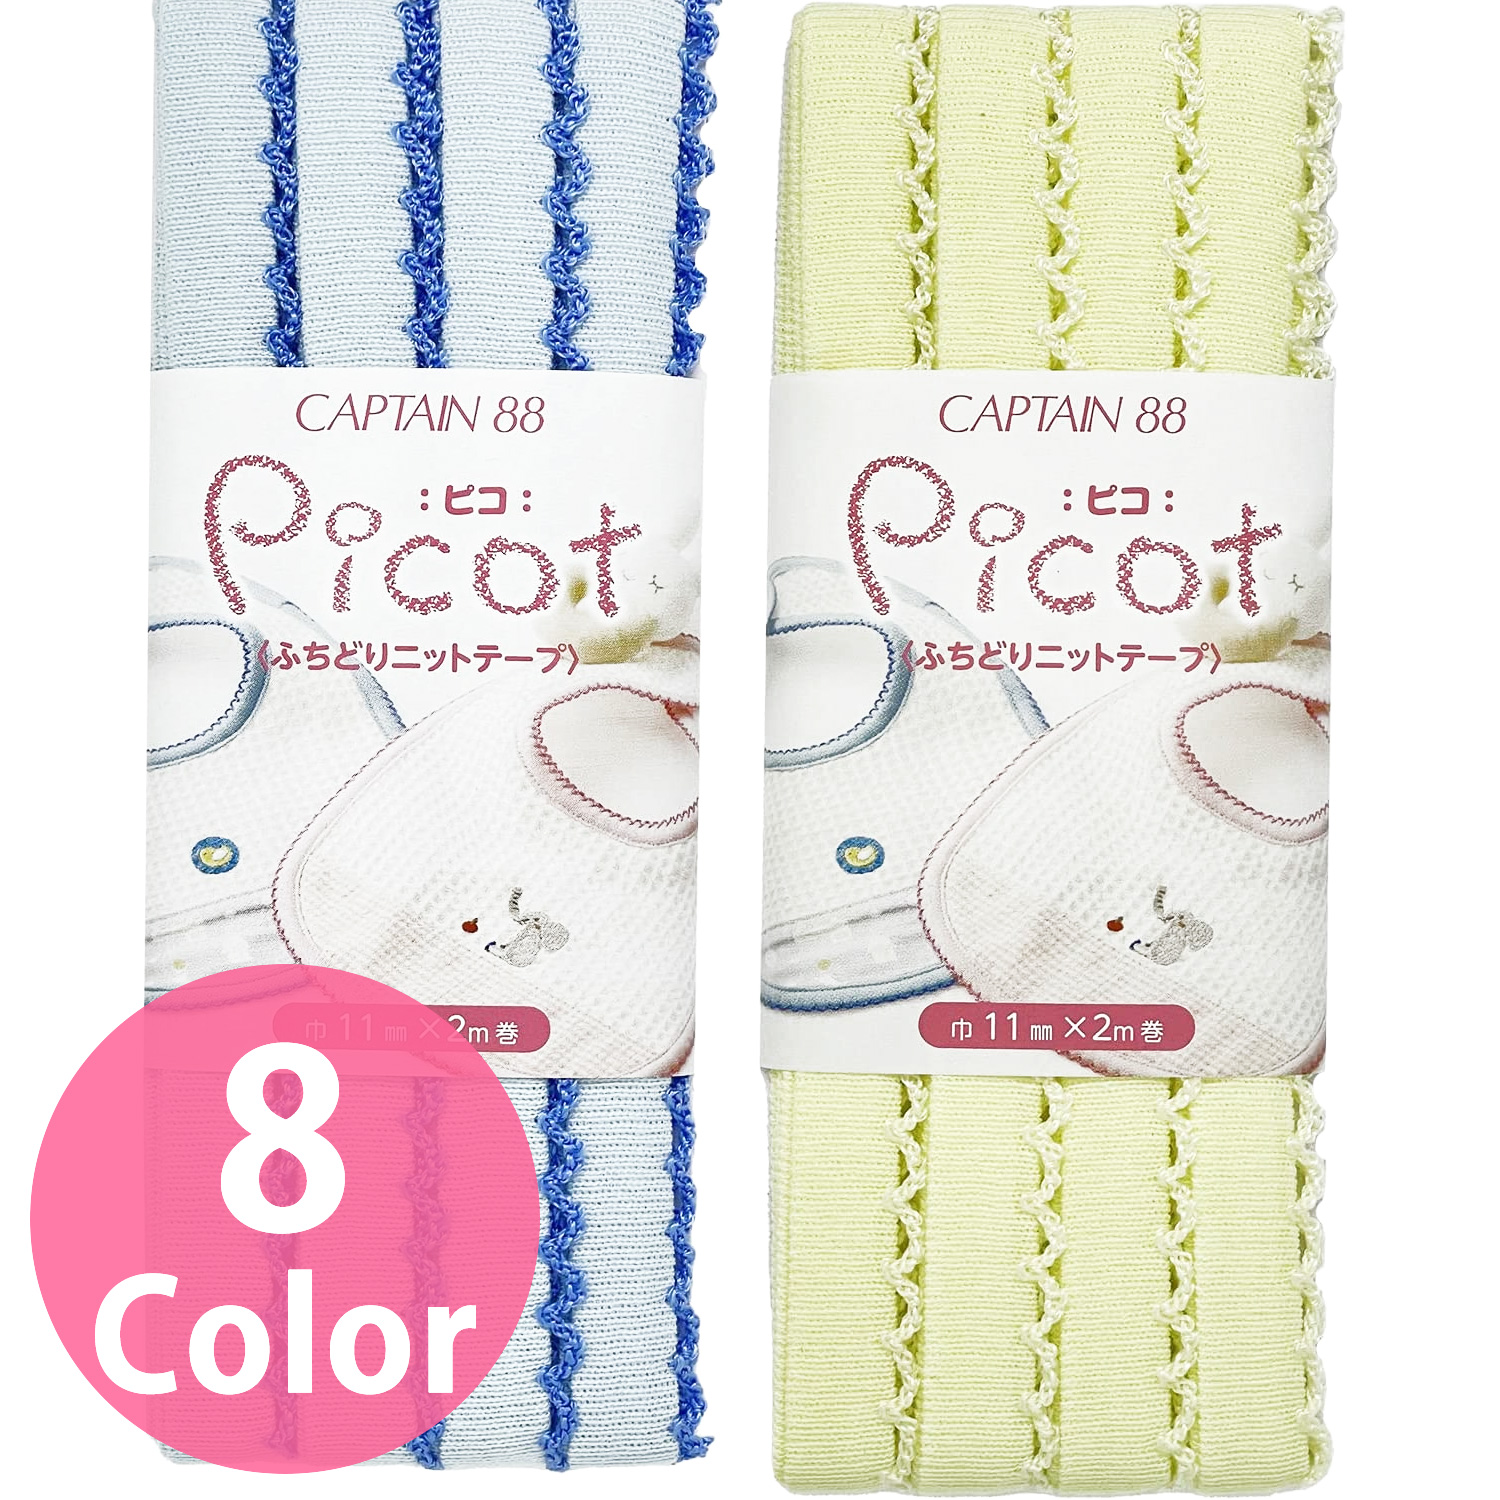 CP195 Picot Knitted Webbing 11mm, 3 packs (bag)